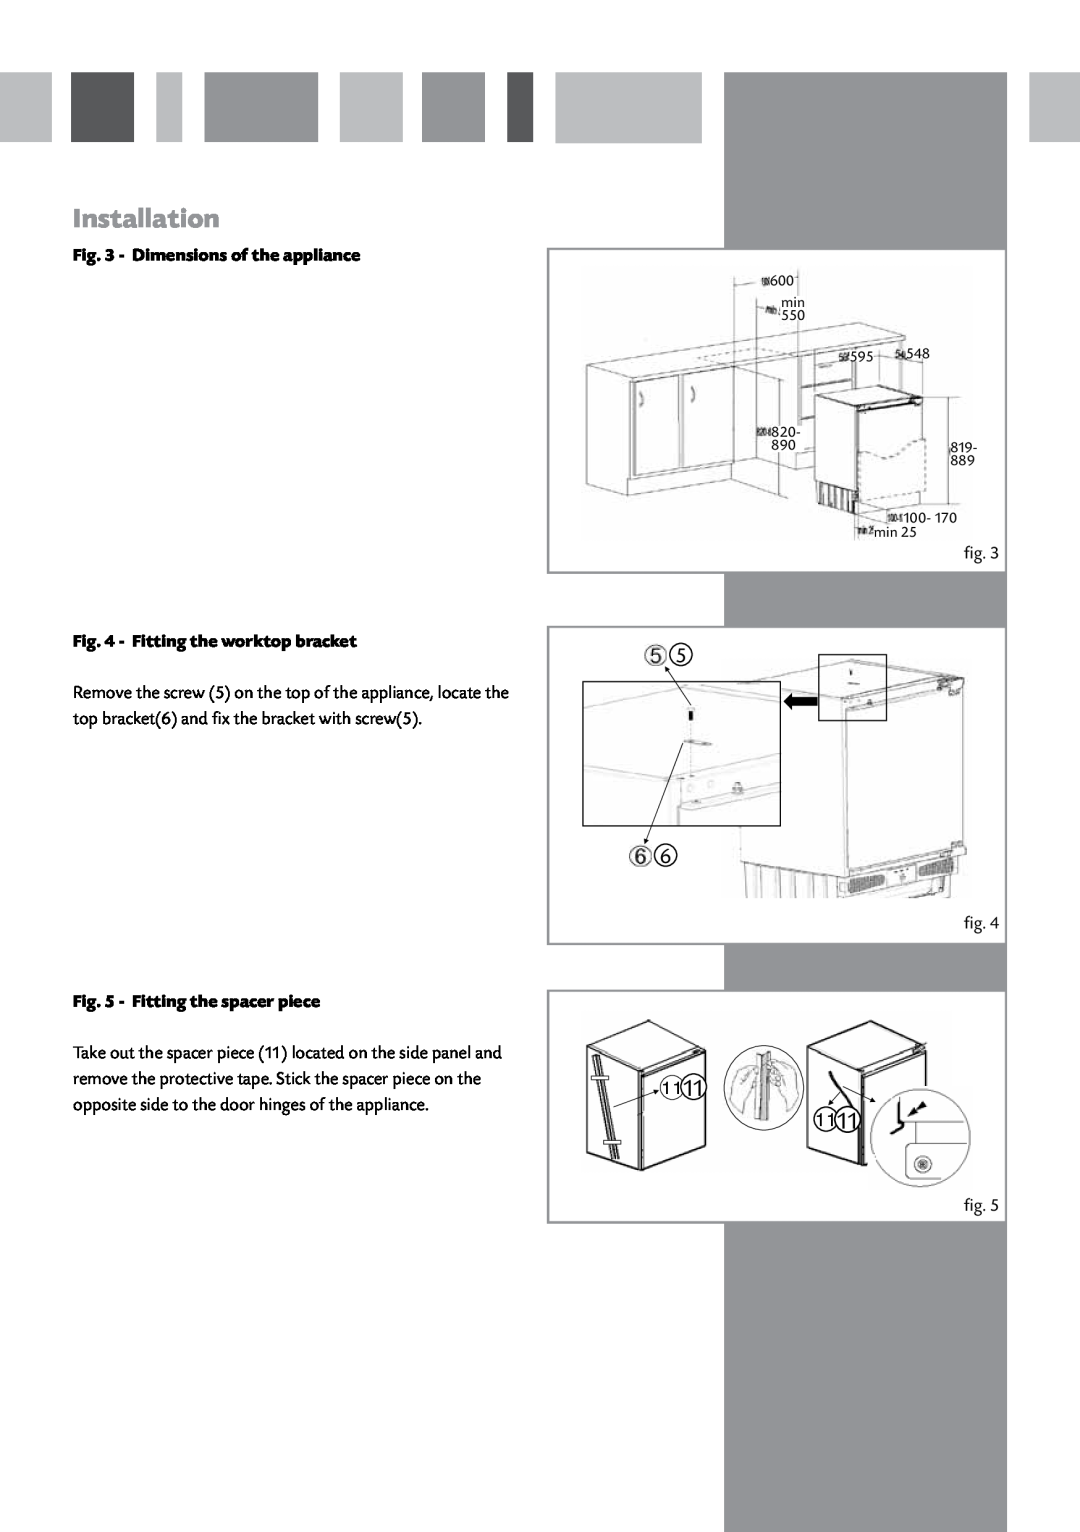 CDA FW282 manual Dimensions of the appliance, Fitting the worktop bracket, Fitting the spacer piece, Installation, 1111 